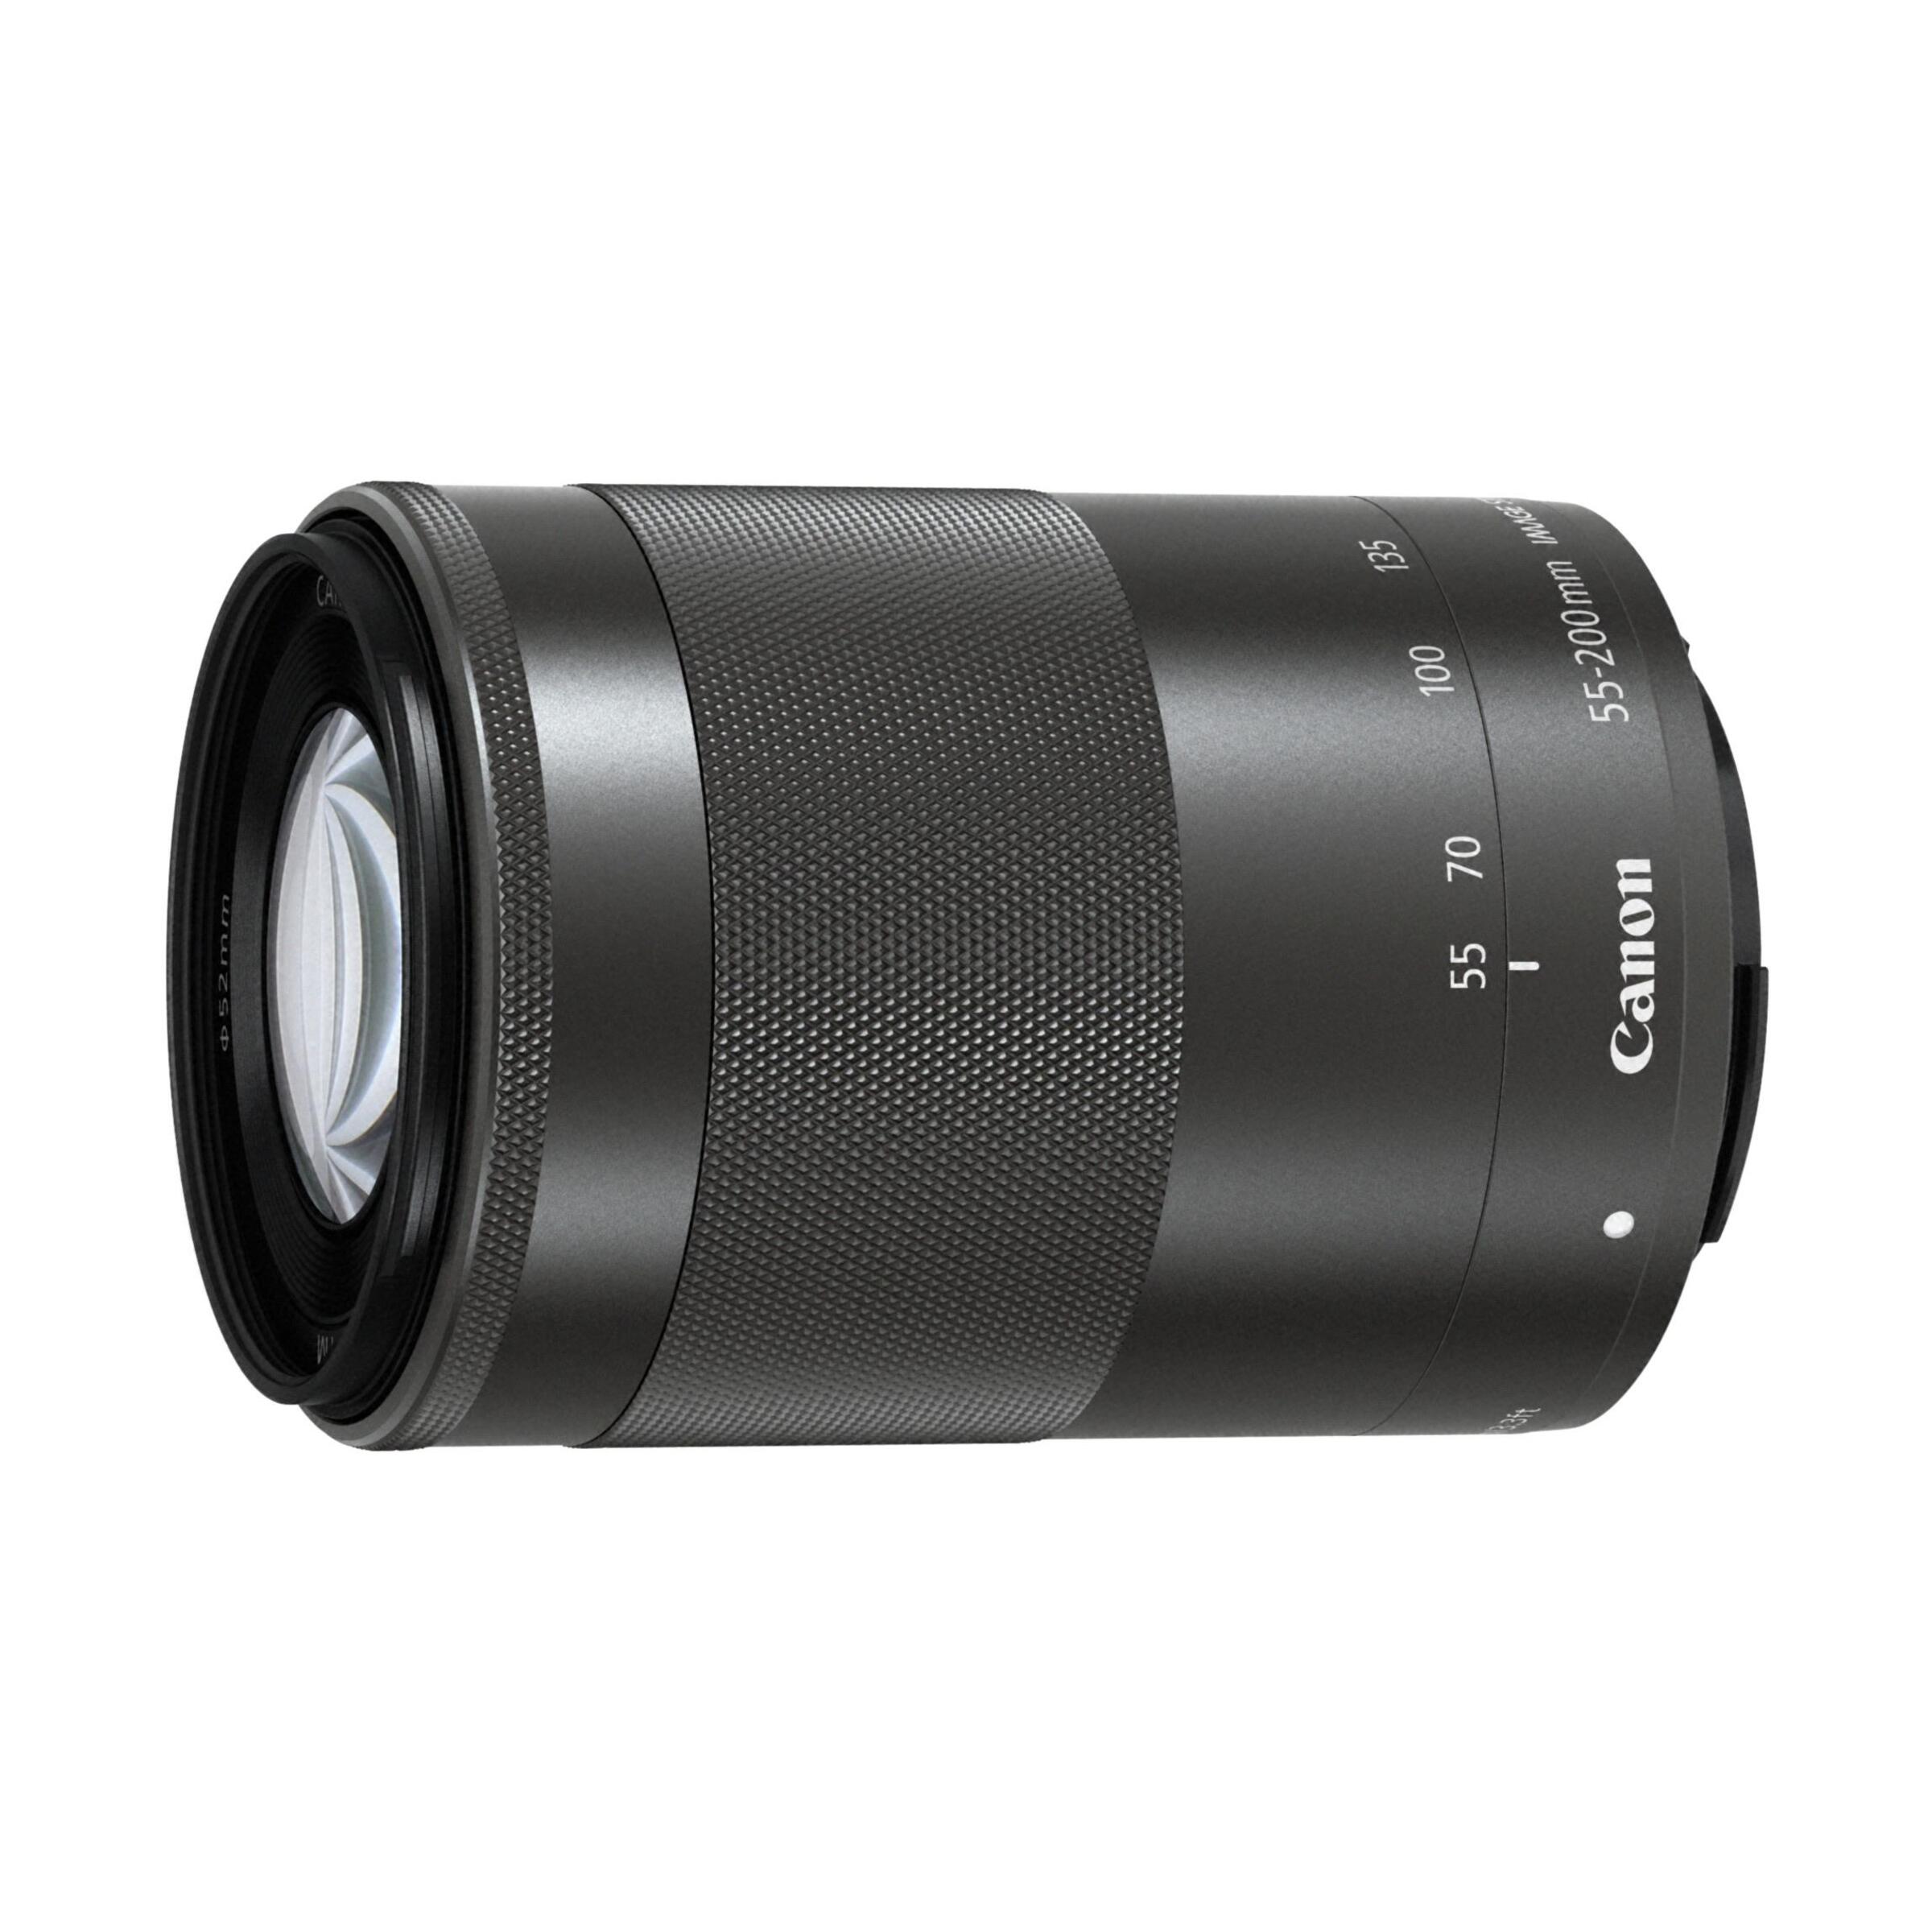 Canon EF-M 55-200mm f/4,5-6,3 IS STM : Graphit-Grau